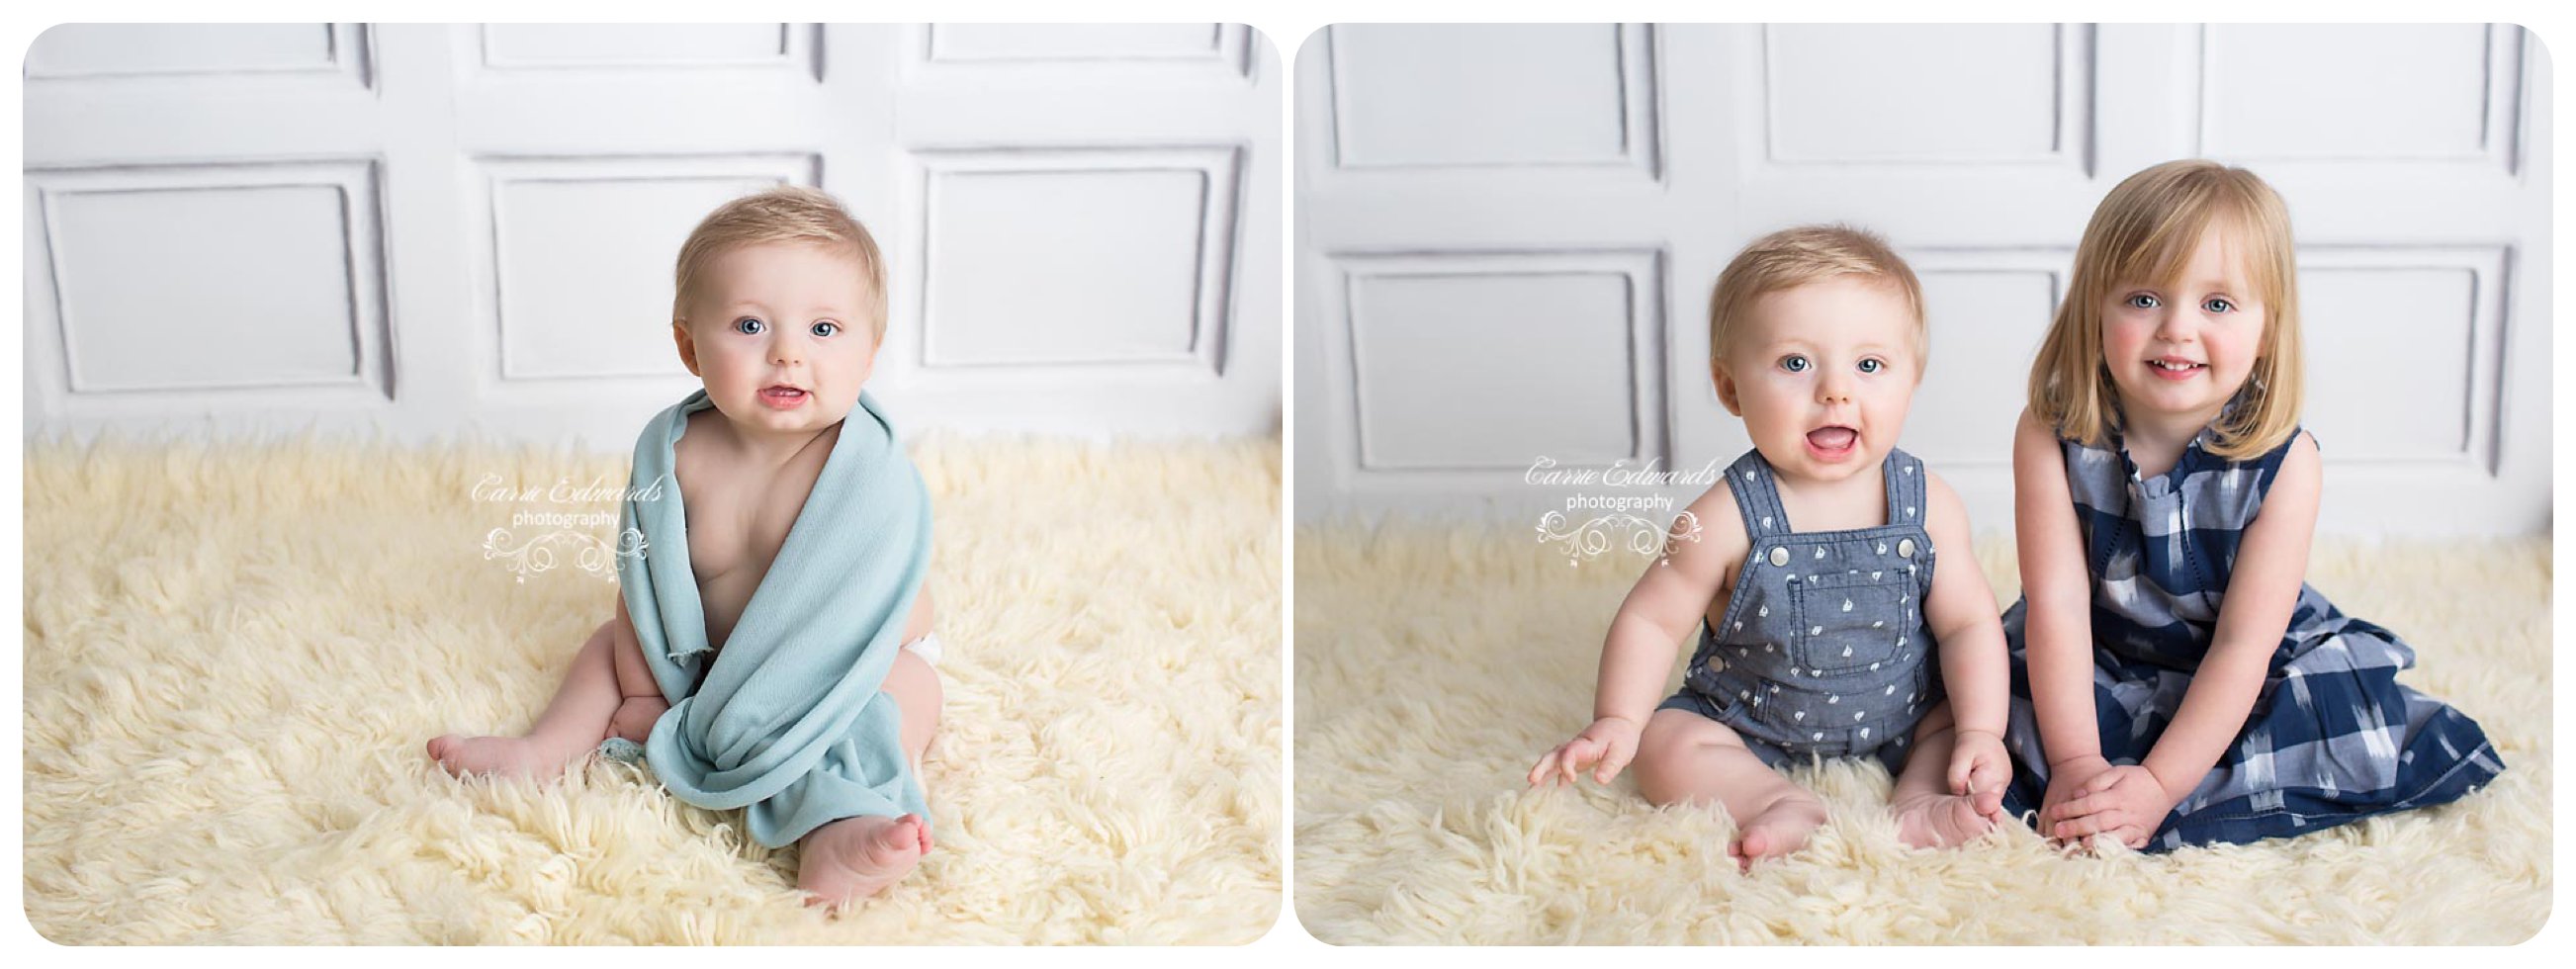 Evergreen Newborn Photographer, Toddler Session, 6 Month Session, Milestone Session, Baby Boy, Cute Baby Boy, Carrie Edwards Photography, Baby with wrap, Baby with sister, sibblings